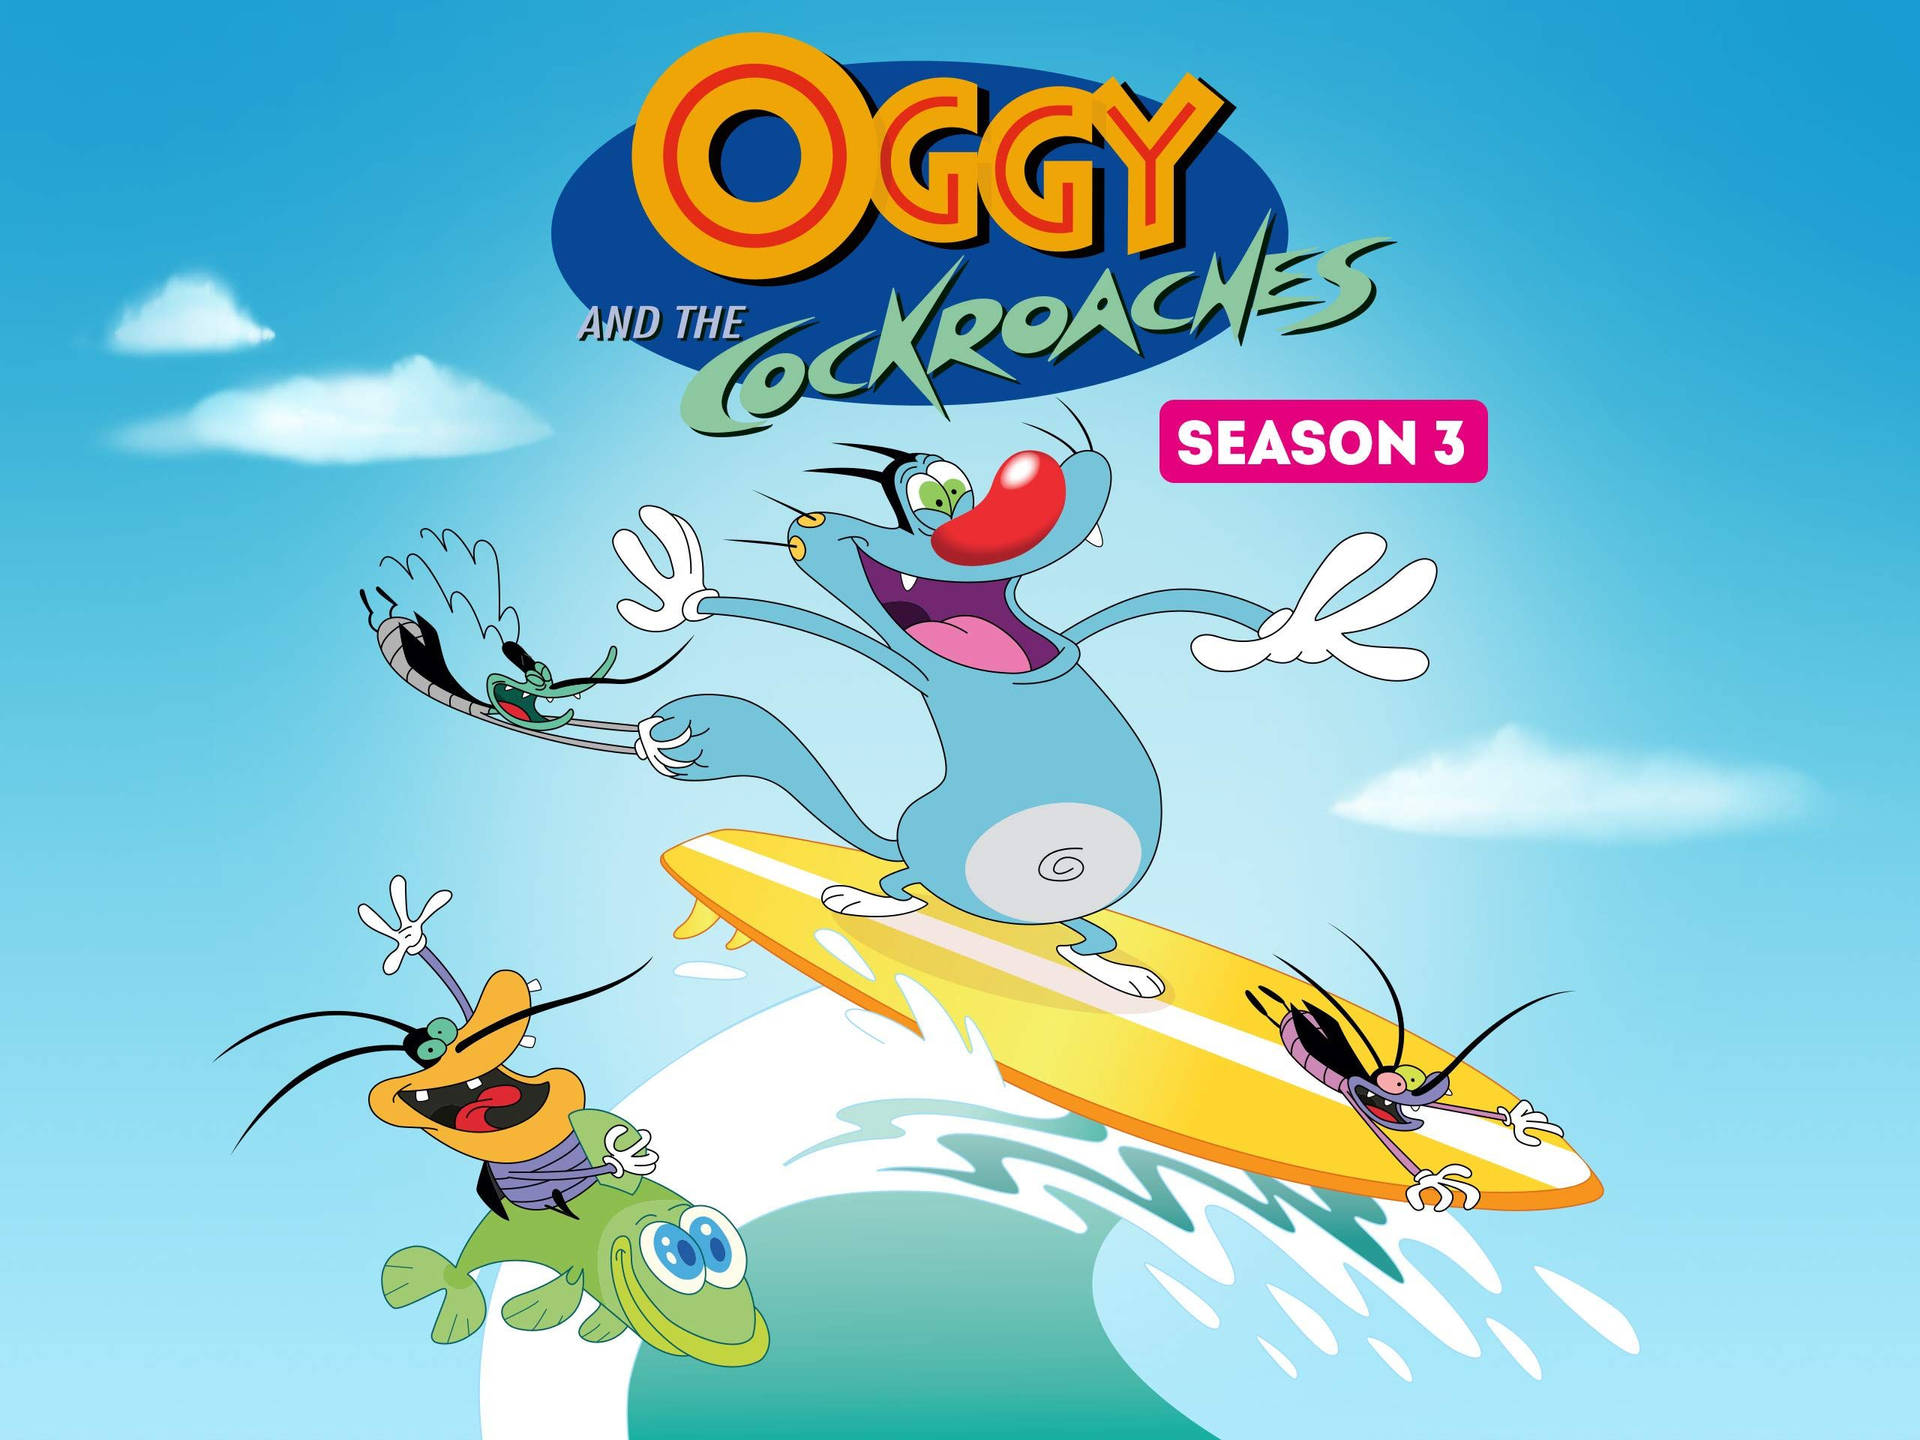 Oggy And The Cockroaches Season 3 Wallpaper